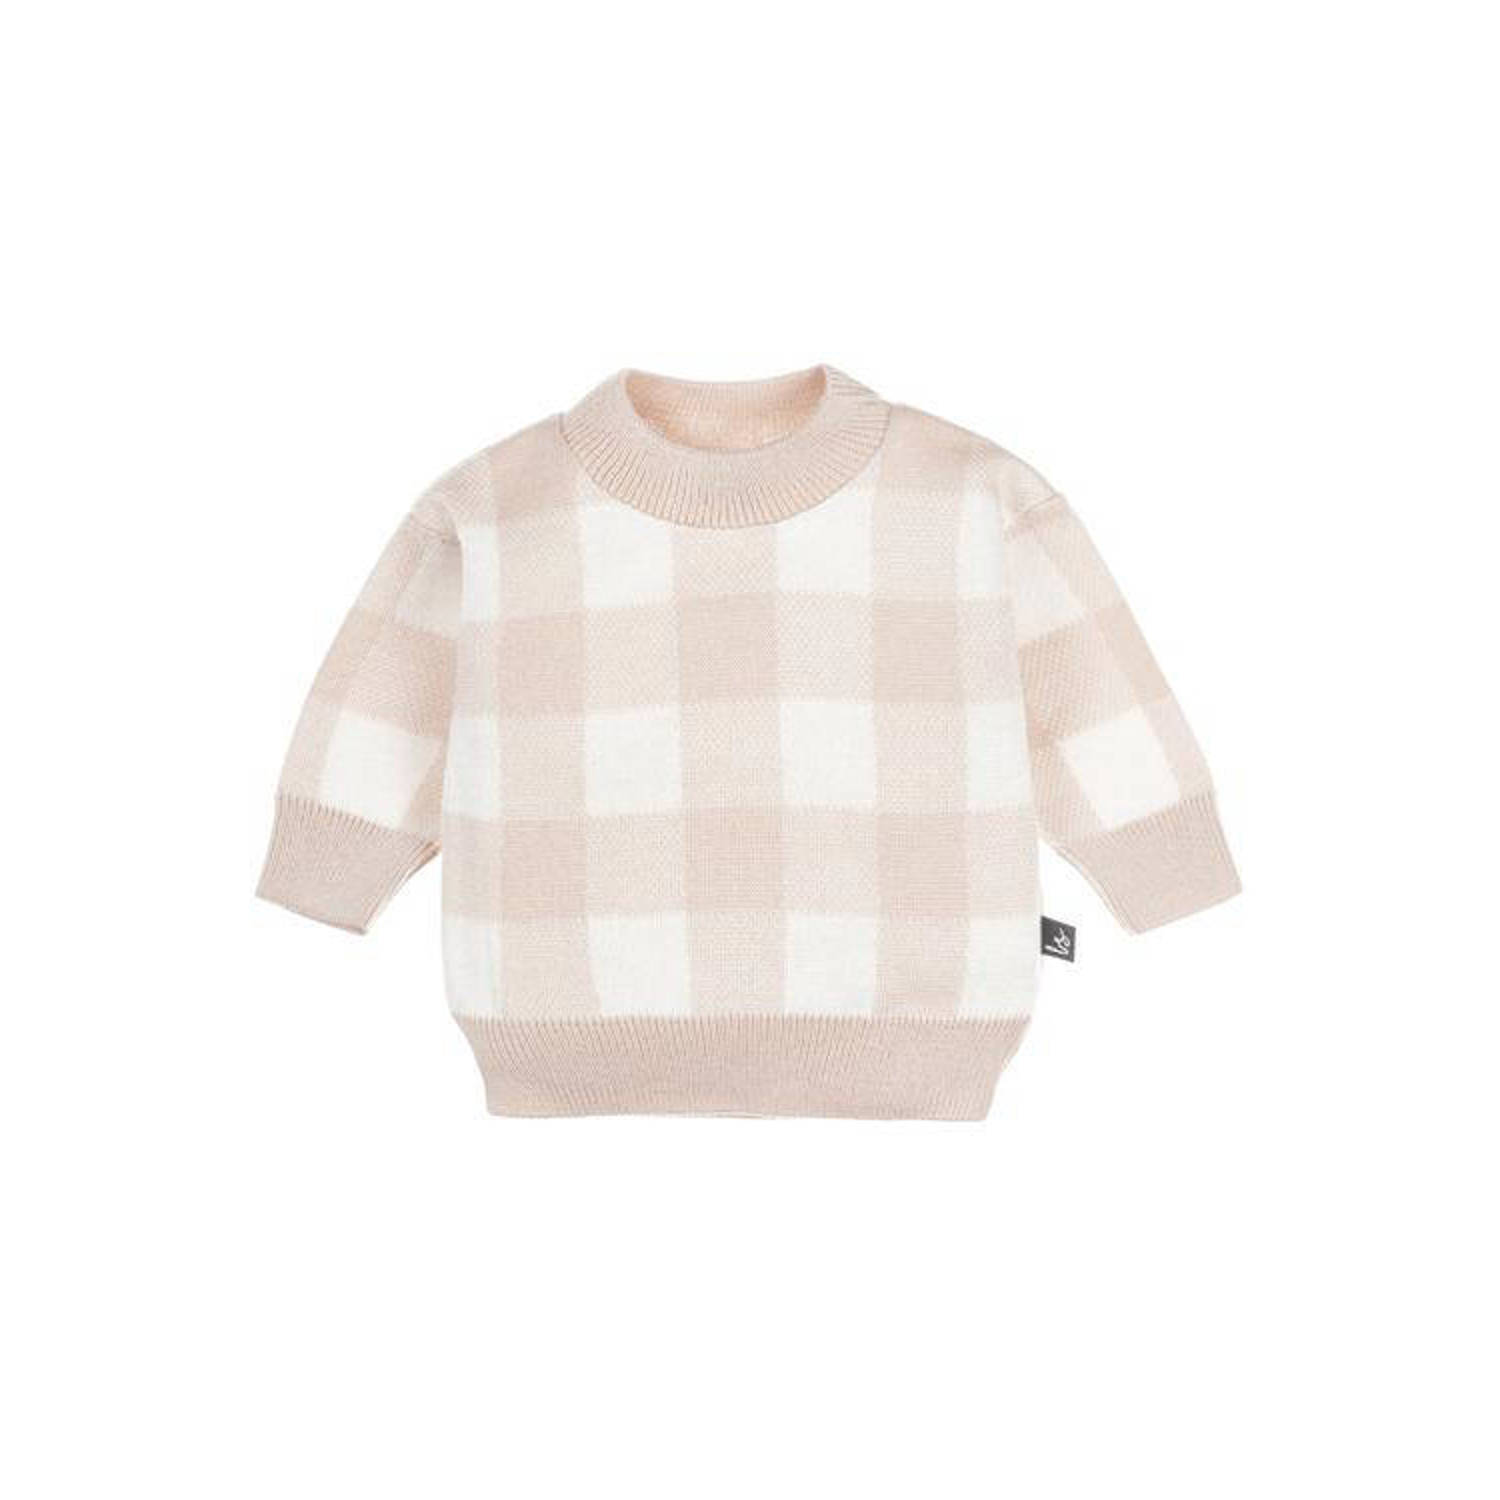 Babystyling baby geruite sweater lichtroze wit Ruit 50 56